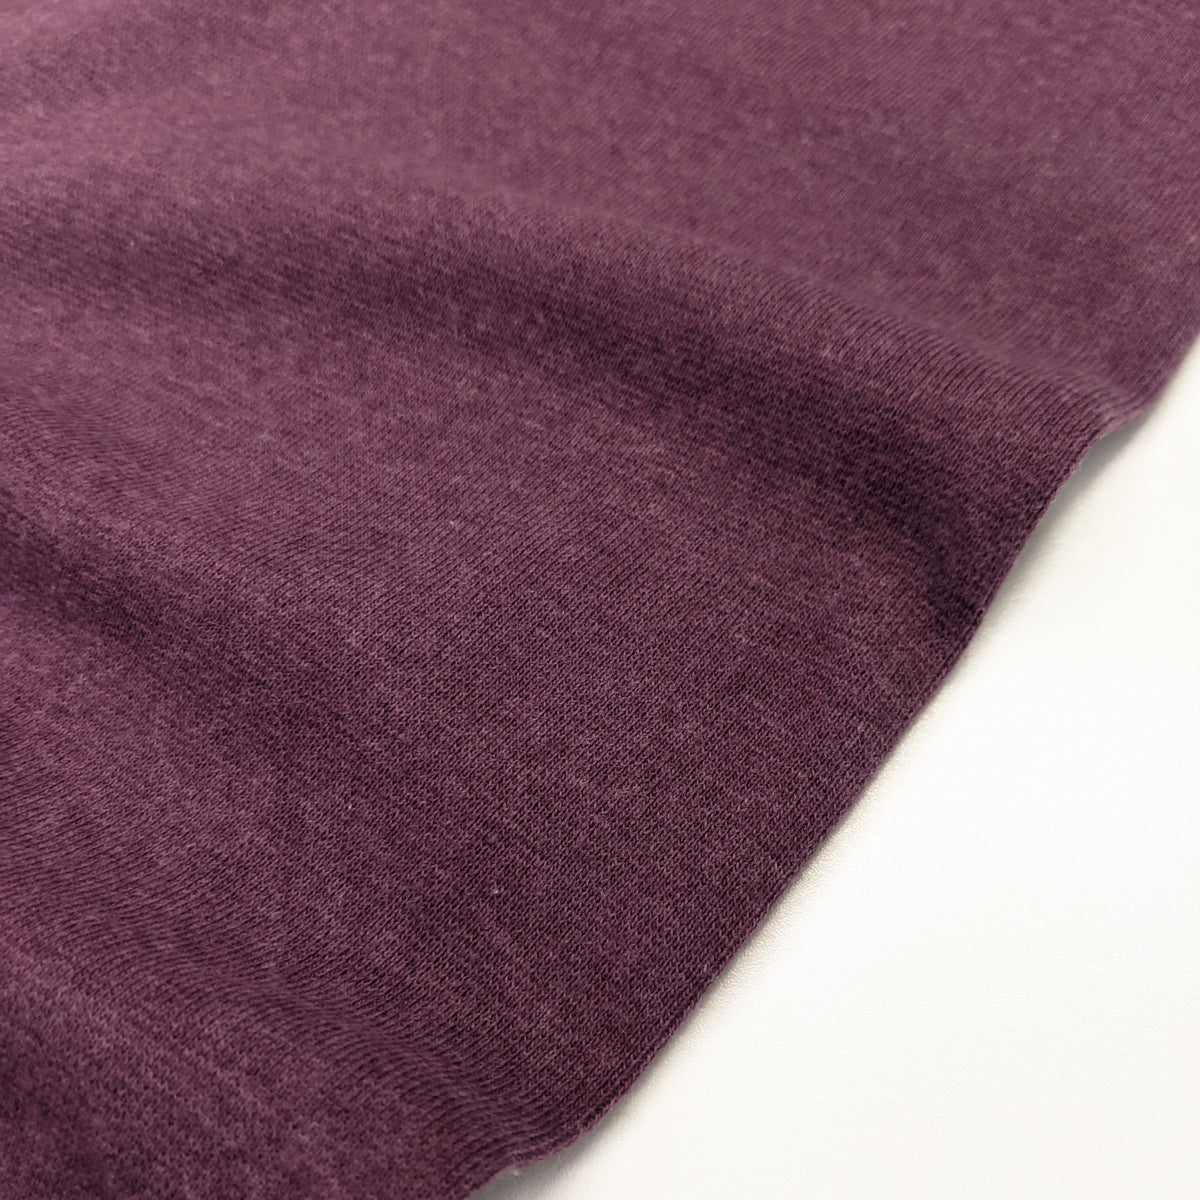 Remnant: Matching Rib Knit for Lounge Sweat - Mulberry (1 metre)